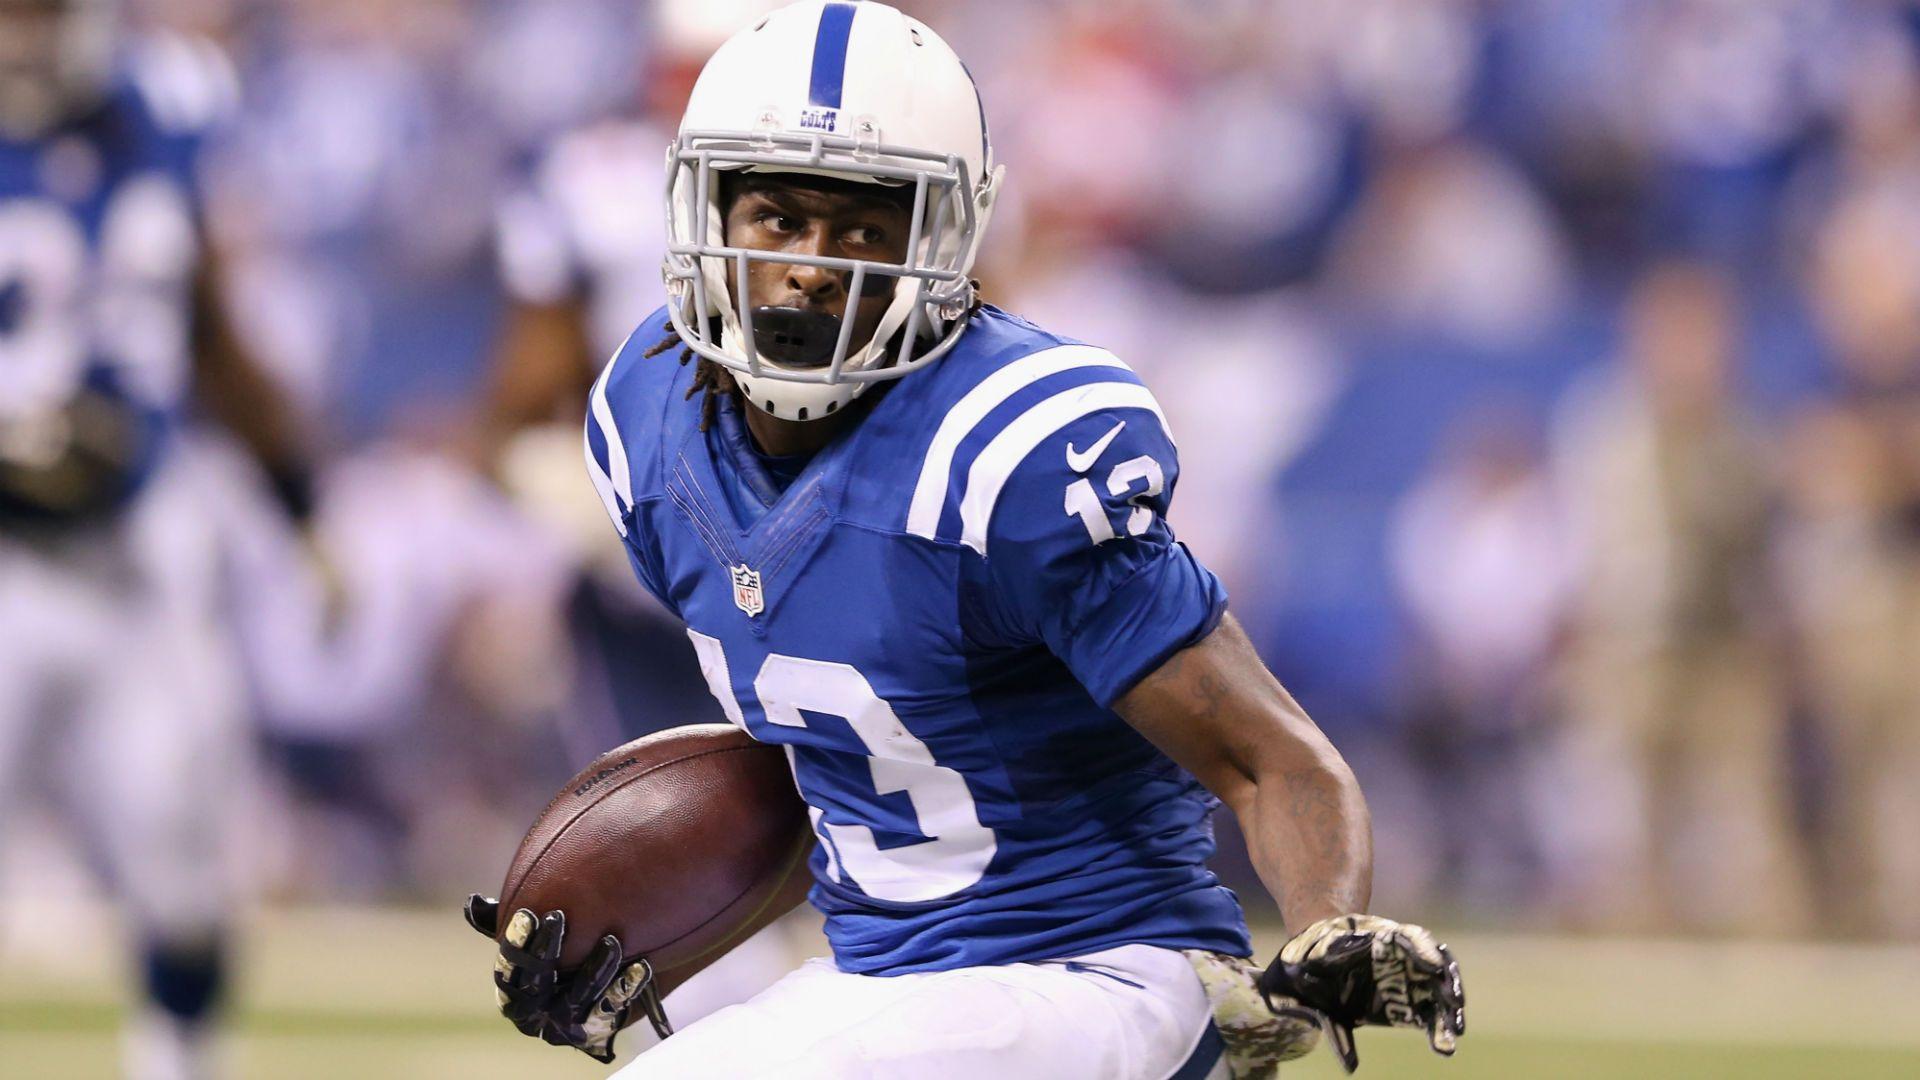 NFL trade rumors: Colts reportedly willing to deal T.Y. Hilton